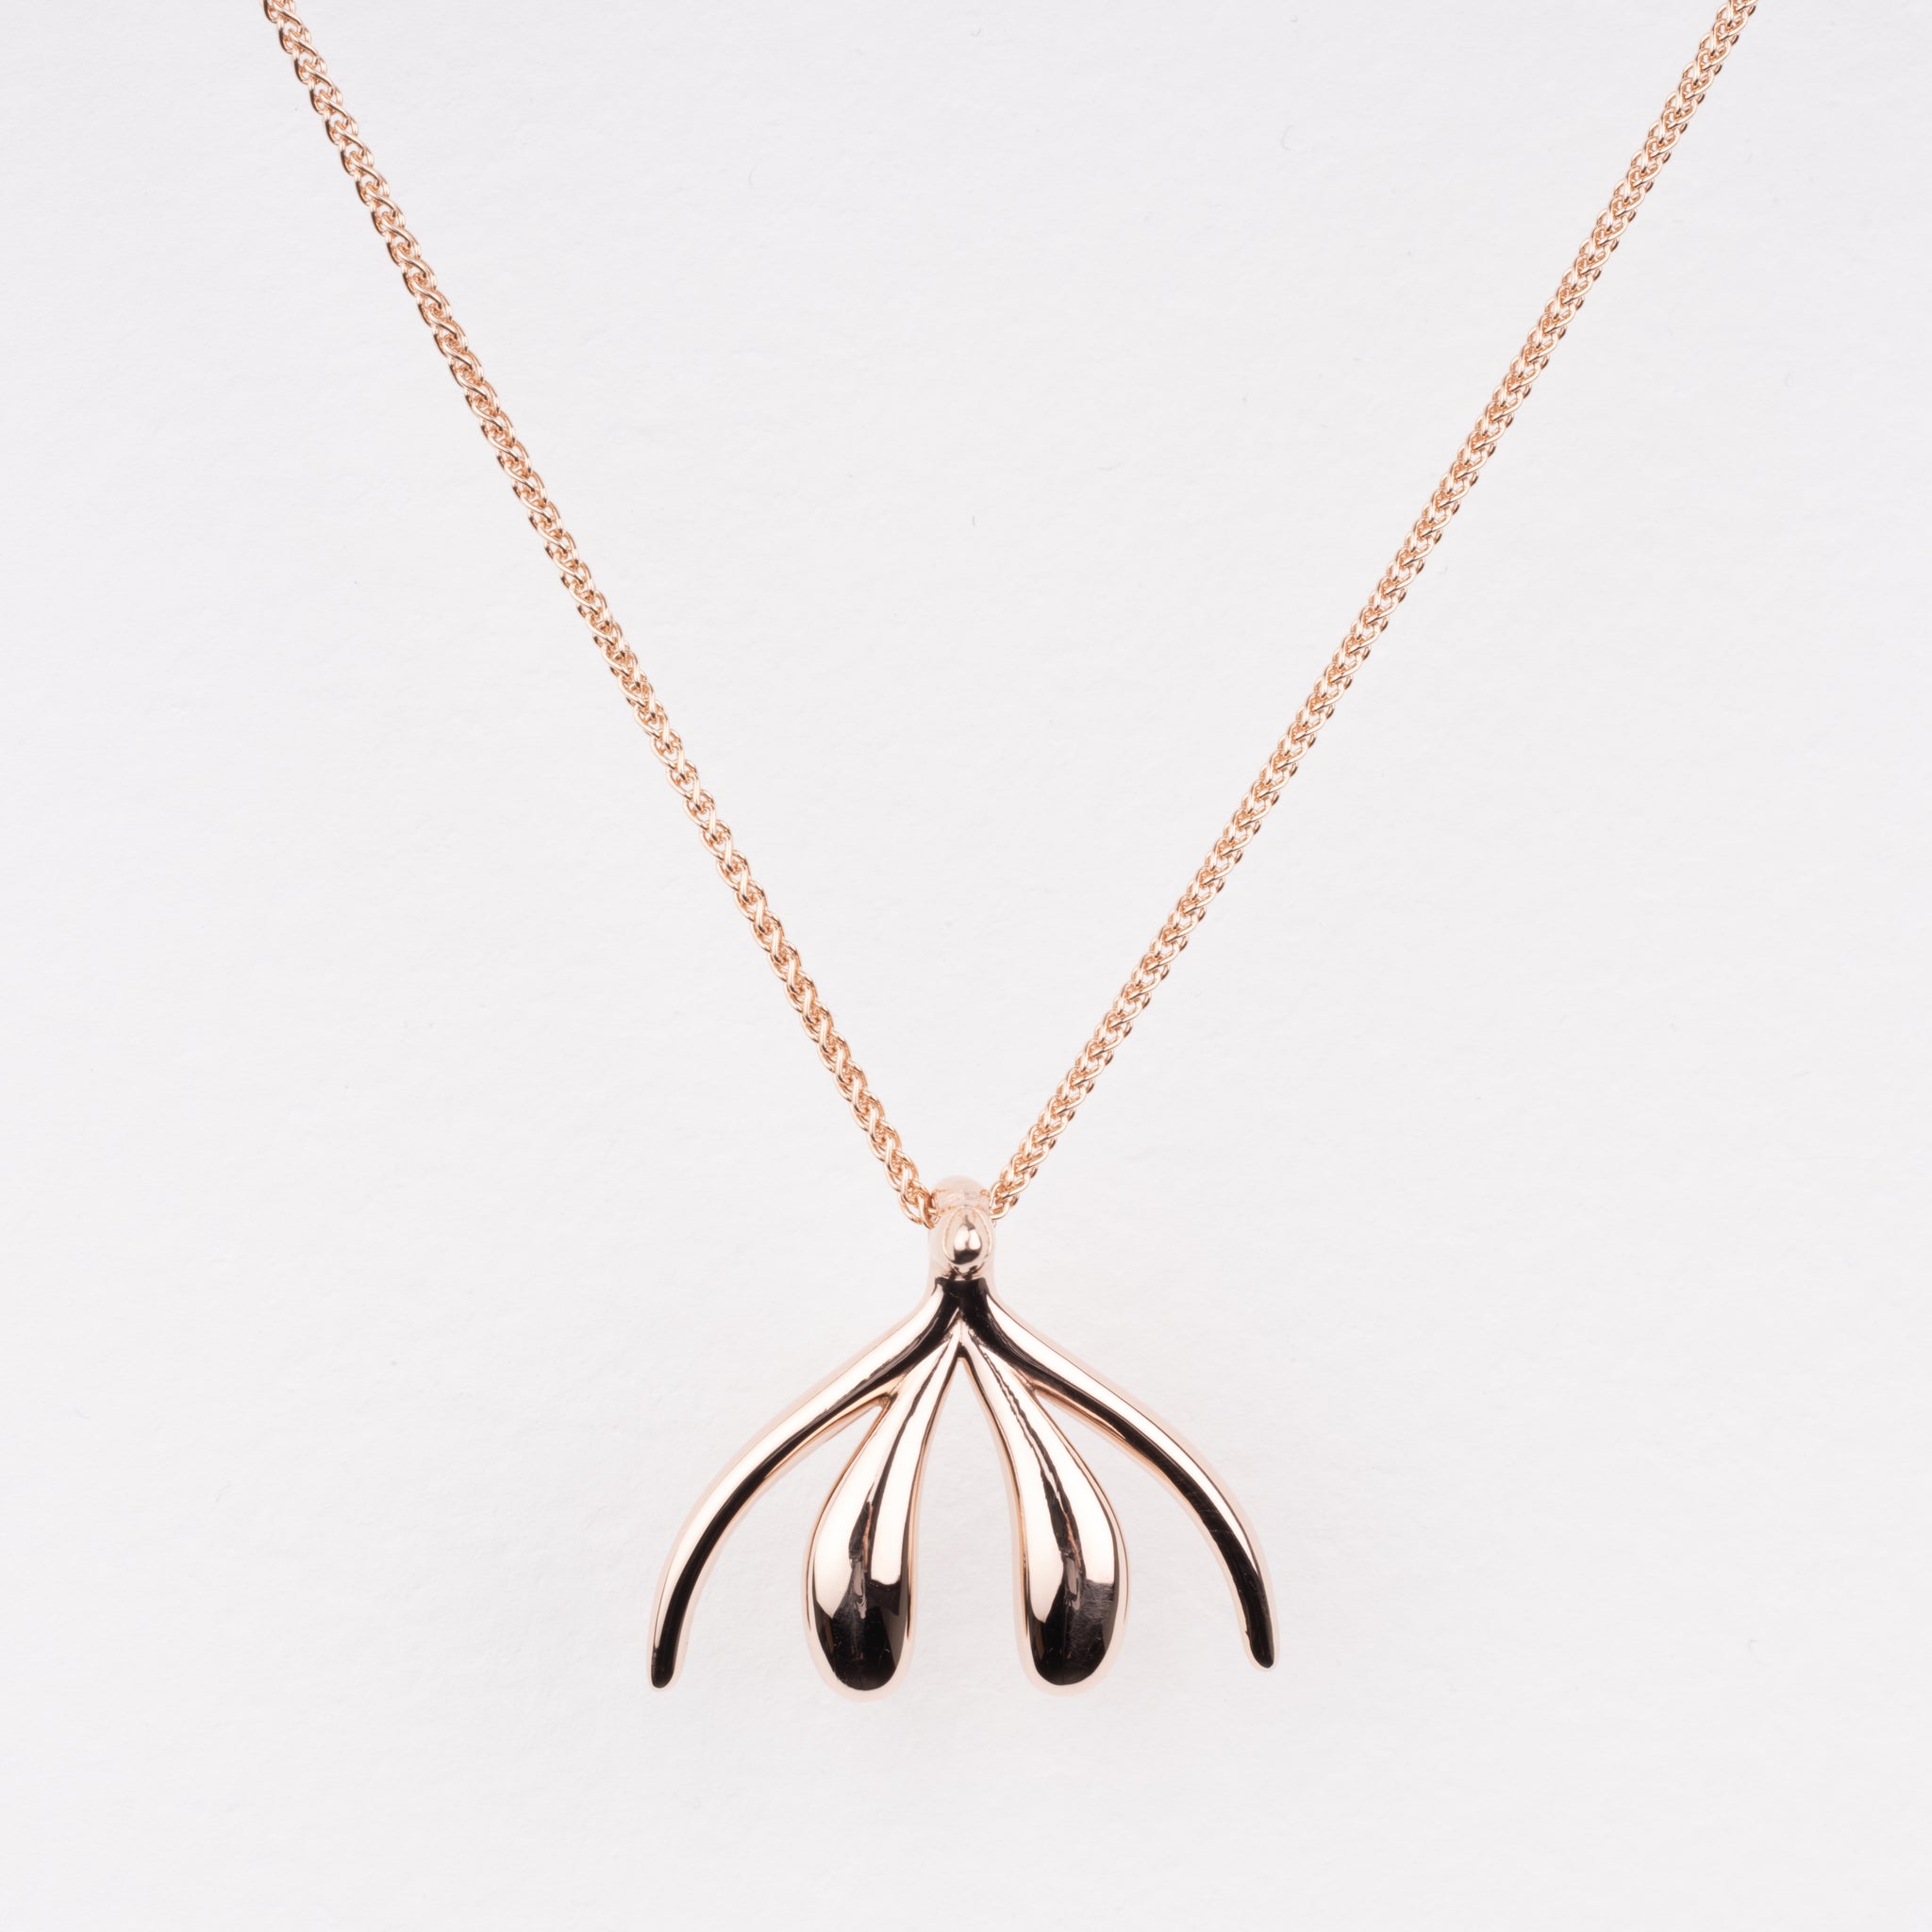 Unconquerable necklace in 14k rose gold by Sophia Wallace. #cliteracy